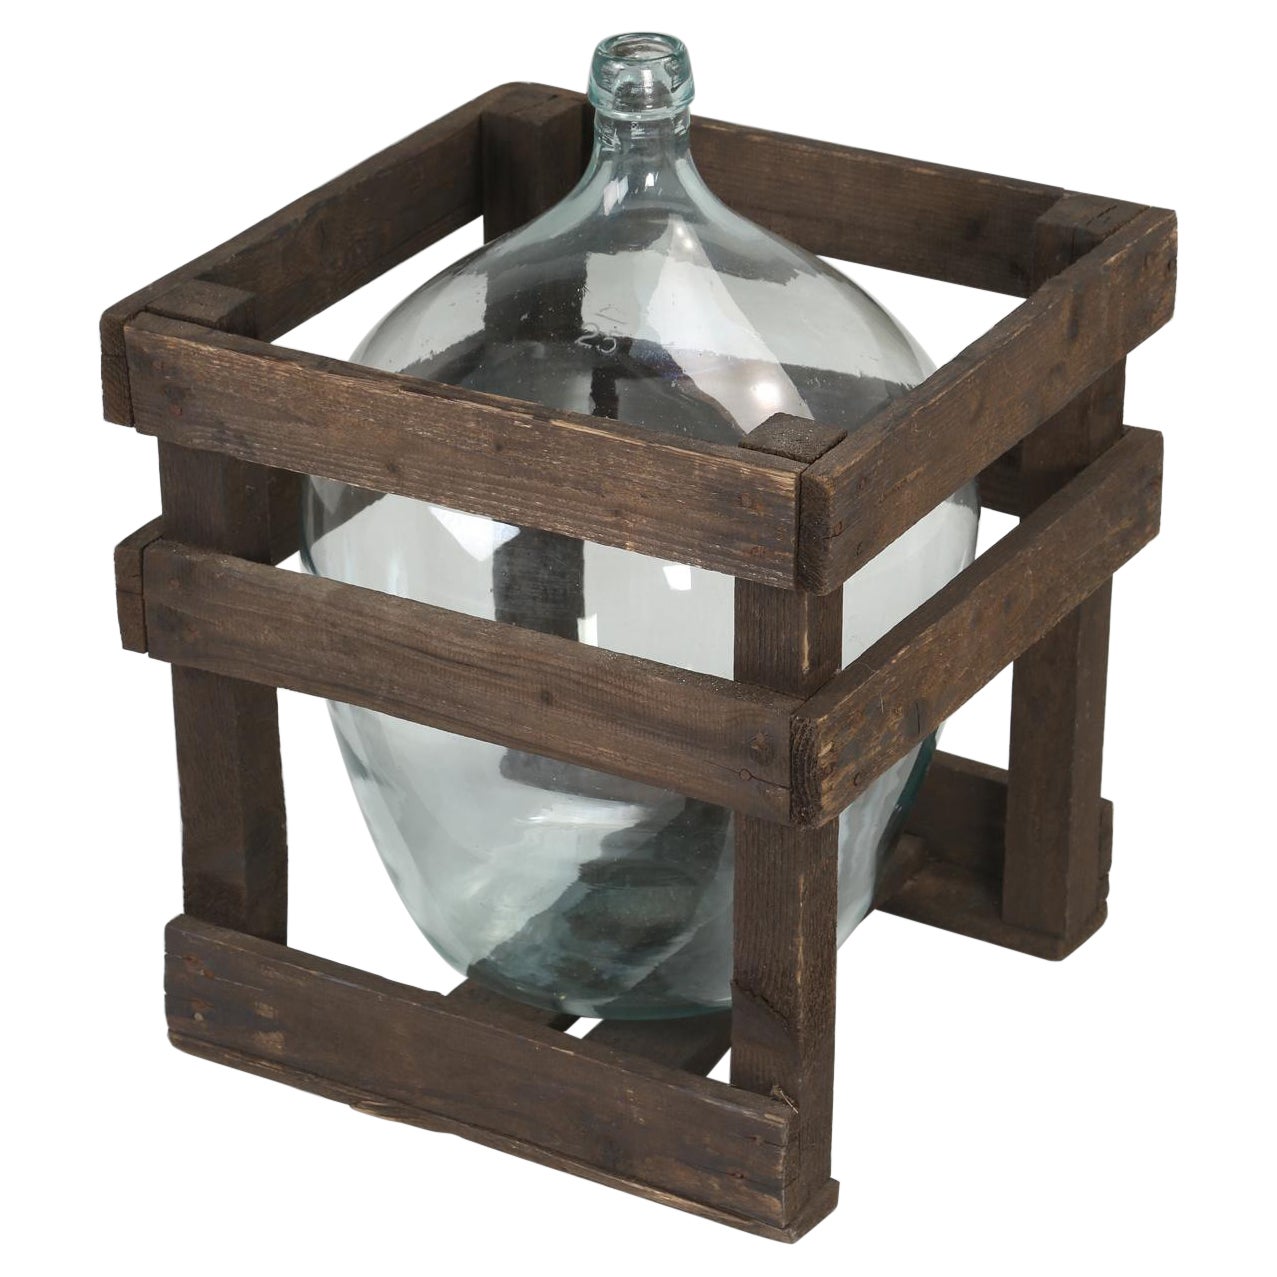 What is a glass carboy used for?